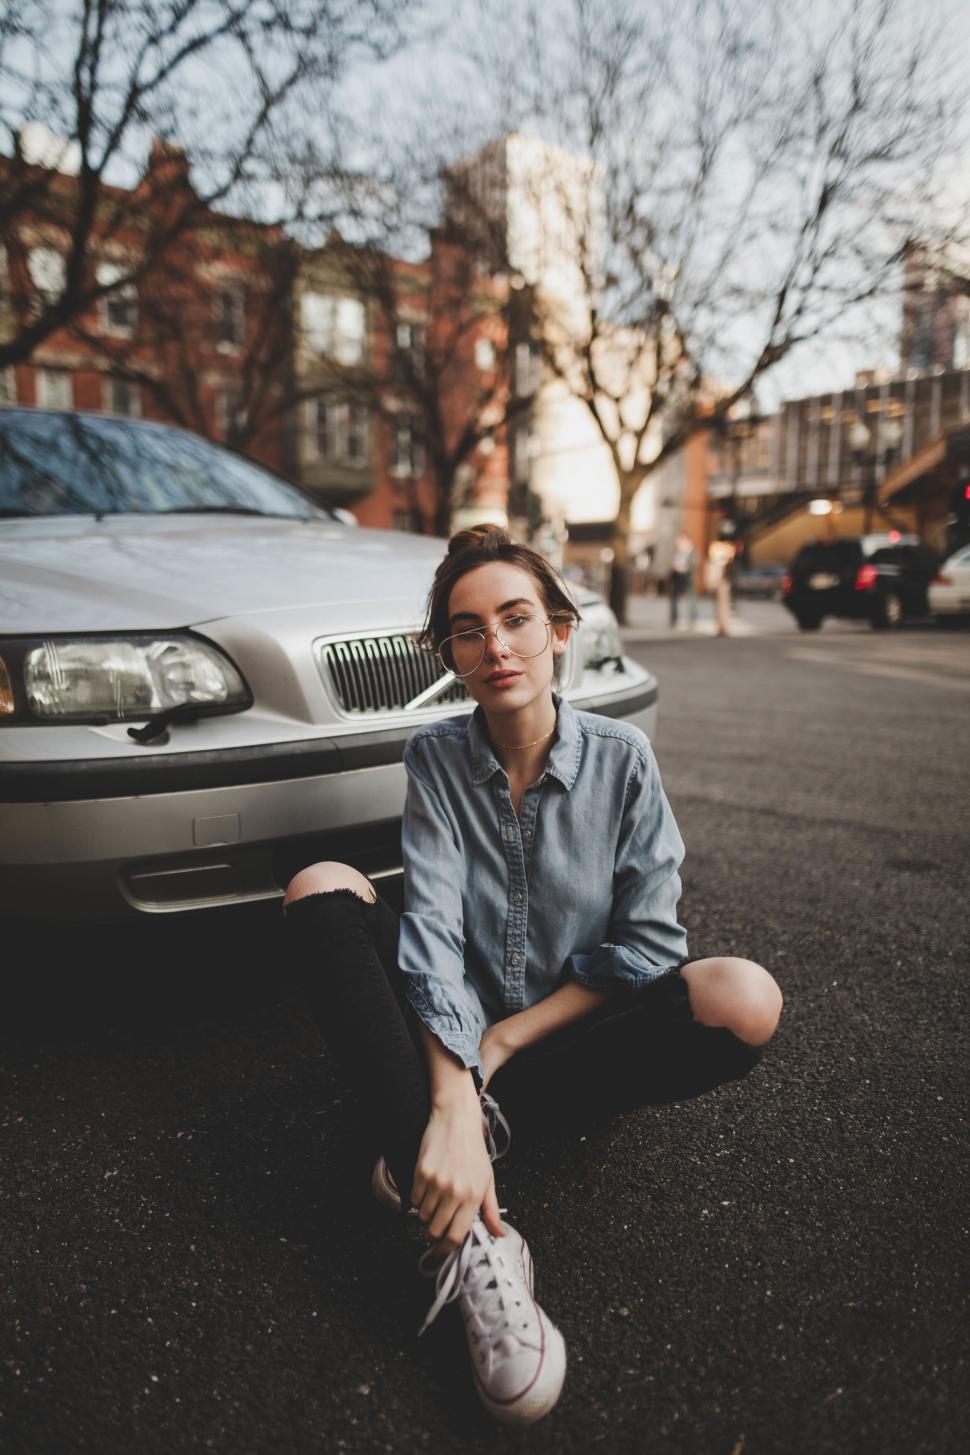 Free Image of A woman sitting on the ground in front of a car 